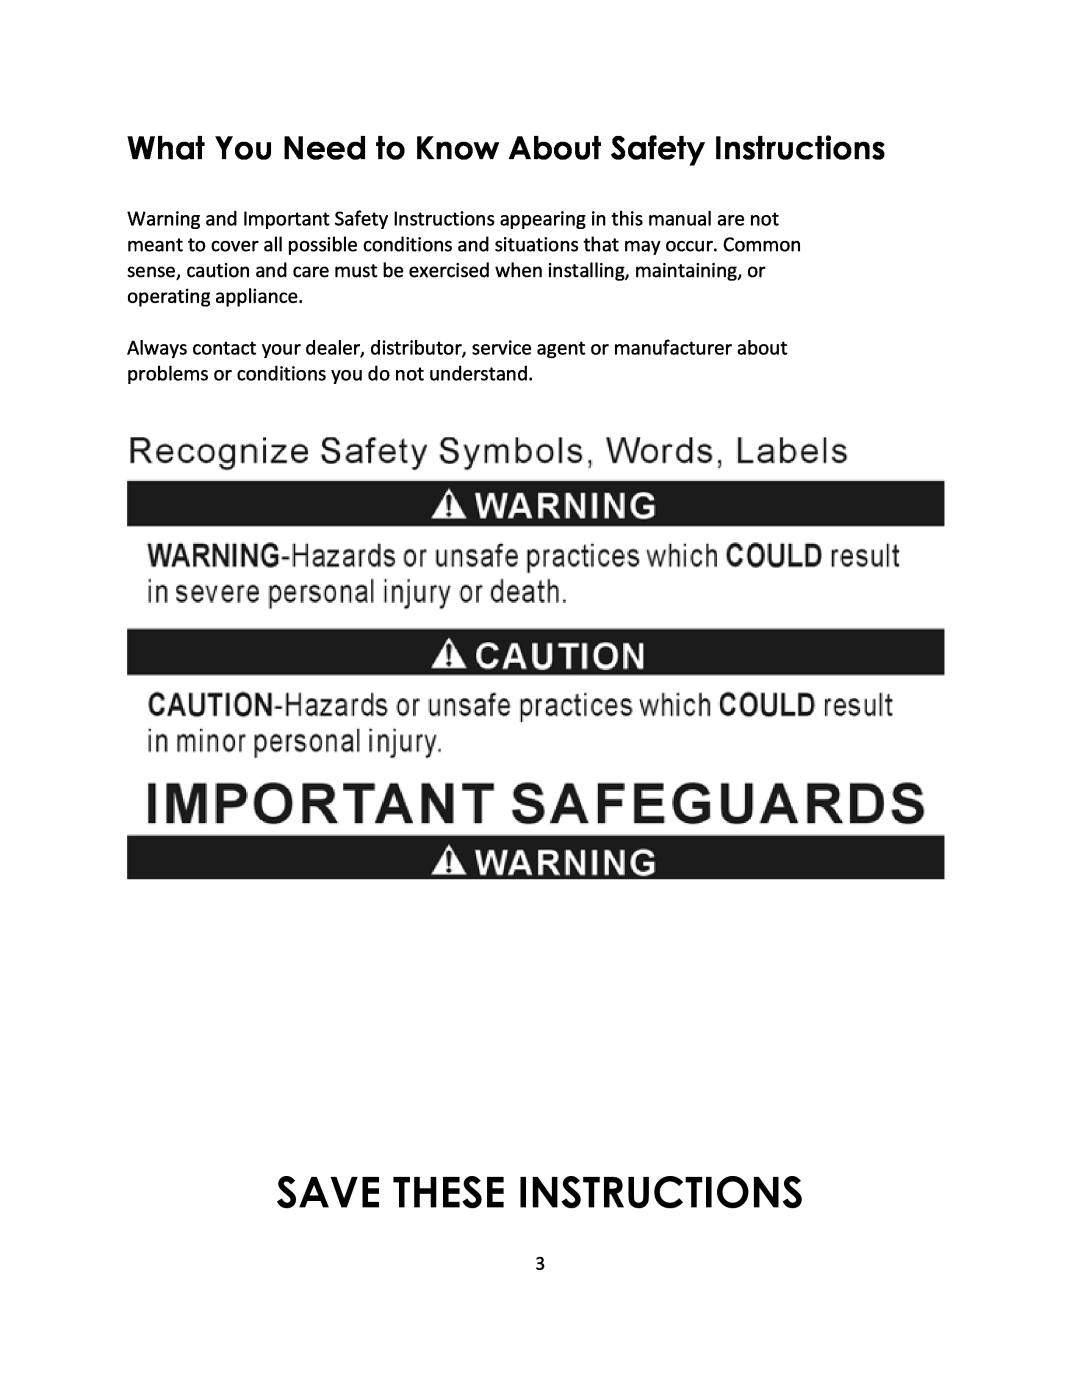 Magic Chef MCSTO4ST instruction manual Save These Instructions, What You Need to Know About Safety Instructions 